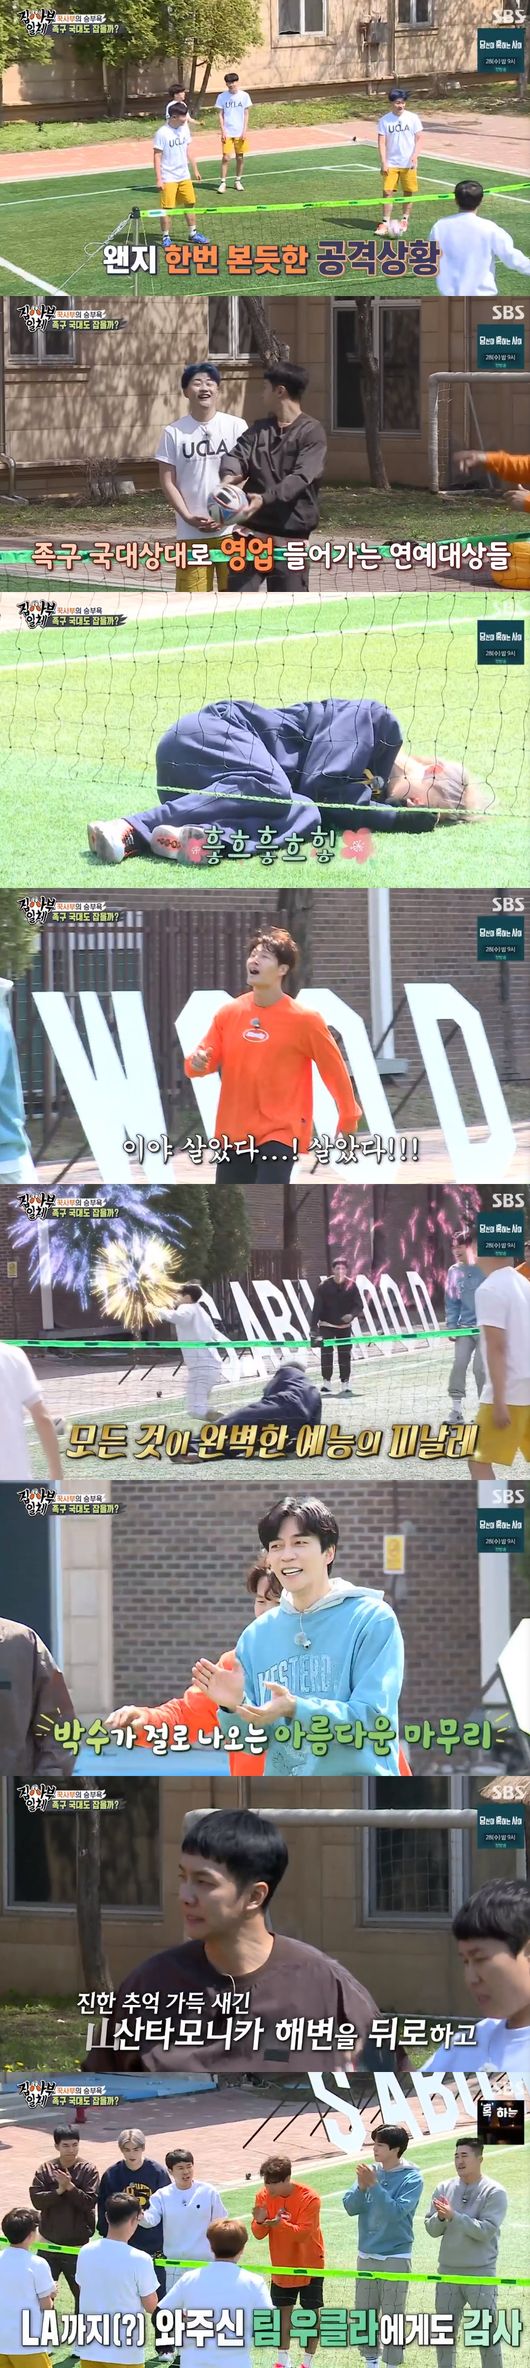 Kim Jong-kook exploded in All The Butlers, and the secret of Long Run was called Exercise.Kim Jong-kook appeared as a master in SBS entertainment All The Butlers broadcast on the 25th.On this day, Kim Jong-kook and Kim Dong-Hyuns shin wrestling rematch was held.Kim Dong-Hyun was in vain, but he changed his foot again and challenged the other side, but in three seconds he was hit by K.O.The members suggested, The end is really strong, and Lets win if we have one finality.Kim Jong-kook, an undefeated steelsmith, decided to play a showdown with his program pride.A winners confrontation was predicted, all of them Jung Eun-woo is likely to win the run, and Jung Eun-woo said, I think it will be faster than muscle man., and eventually Cha Eun-woo won well.At this time, UCLA players proposed footwear, each showing checks against each other, and the Ukla teams provoked with specific scores, saying, Can we win, we will win 15 to 12?The members of All The Butlers showed a formidable momentum saying, We are 15?But the mood was moving toward Ukla.Kim Jong-kook said, Lets not make such a mistake, I will win this way. Do not be greedy, do not try to be a hero.After all, the repressed fight-off was sealed, and Kim Jong-kook went into the game himself, chasing closely from 15-point match to 12-11.Kim Jong-kook made a mistake in all expectations, and Kim Jong-kook made a mistake to Kim Dong-Hyun next to him, saying, I care because you are screaming.Kim Dong-Hyun laughed, saying, Why do you blame me? Yang Se-hyeong also laughed, saying, My brother is not just a temper, this is my brothers fault. Kim Jong-kook interviewed Yang Se-hee separately and said, You should support me.With only one point match left, the Ukla team suddenly showed off their skills and showed extraordinary skills.They were players who could control scores, not even the bottom and the end.Kim Jong-kook laughed at the suggestion of a golden goal on the spot, Yang Se-hyeong and Lee Seung-gi also made a proposal that would make the face hot.Cha Eun-woo, behind him, was embarrassed, saying, Do you have such a football team or a non-manner? And finished Exercise with an ending fairy.Kim Jong-kook said, Lets eat because we have been exercise. He said that he would guide the Kushlan restaurant tour properly with the myoschlan guide.Kim Jong-kooks restaurant was a gym, and Kim Jong-kook told Kim Dong-Hyun, who had a reduced muscle mass, that the faces like us have to have some body, this is a social promise.Kim Jong-kook said, There is no day off for Exercise. He grabbed the fitness equipment and said, I will tell you how to catch it deliciously, and I will tell you how to catch it delicious.The members acknowledged Kim Jong-kook, who became a myopia, and Kim Jong-kook also said, Exercise is life, not Exercise should be one to give up life.The most important thing is sincerity and consistency.Kim Jong-kook advised, If you are going to be long, it is important, there are many difficult days to keep, but only one thing, find one thing you really like.Kim Jong-kook added: That way things can be balanced on continuing and doing, when stress on work becomes heavy, you lose balance and become The Flying Dutchman.Kim Jong-kook advised him to find one thing he liked and balance his work, saying, If there was no Exercise in turbo, it would surely have been The Flying Dutchman, living in the entertainment industry for a long time and being moderate because of Exercise.All The Butlers broadcast screen capture